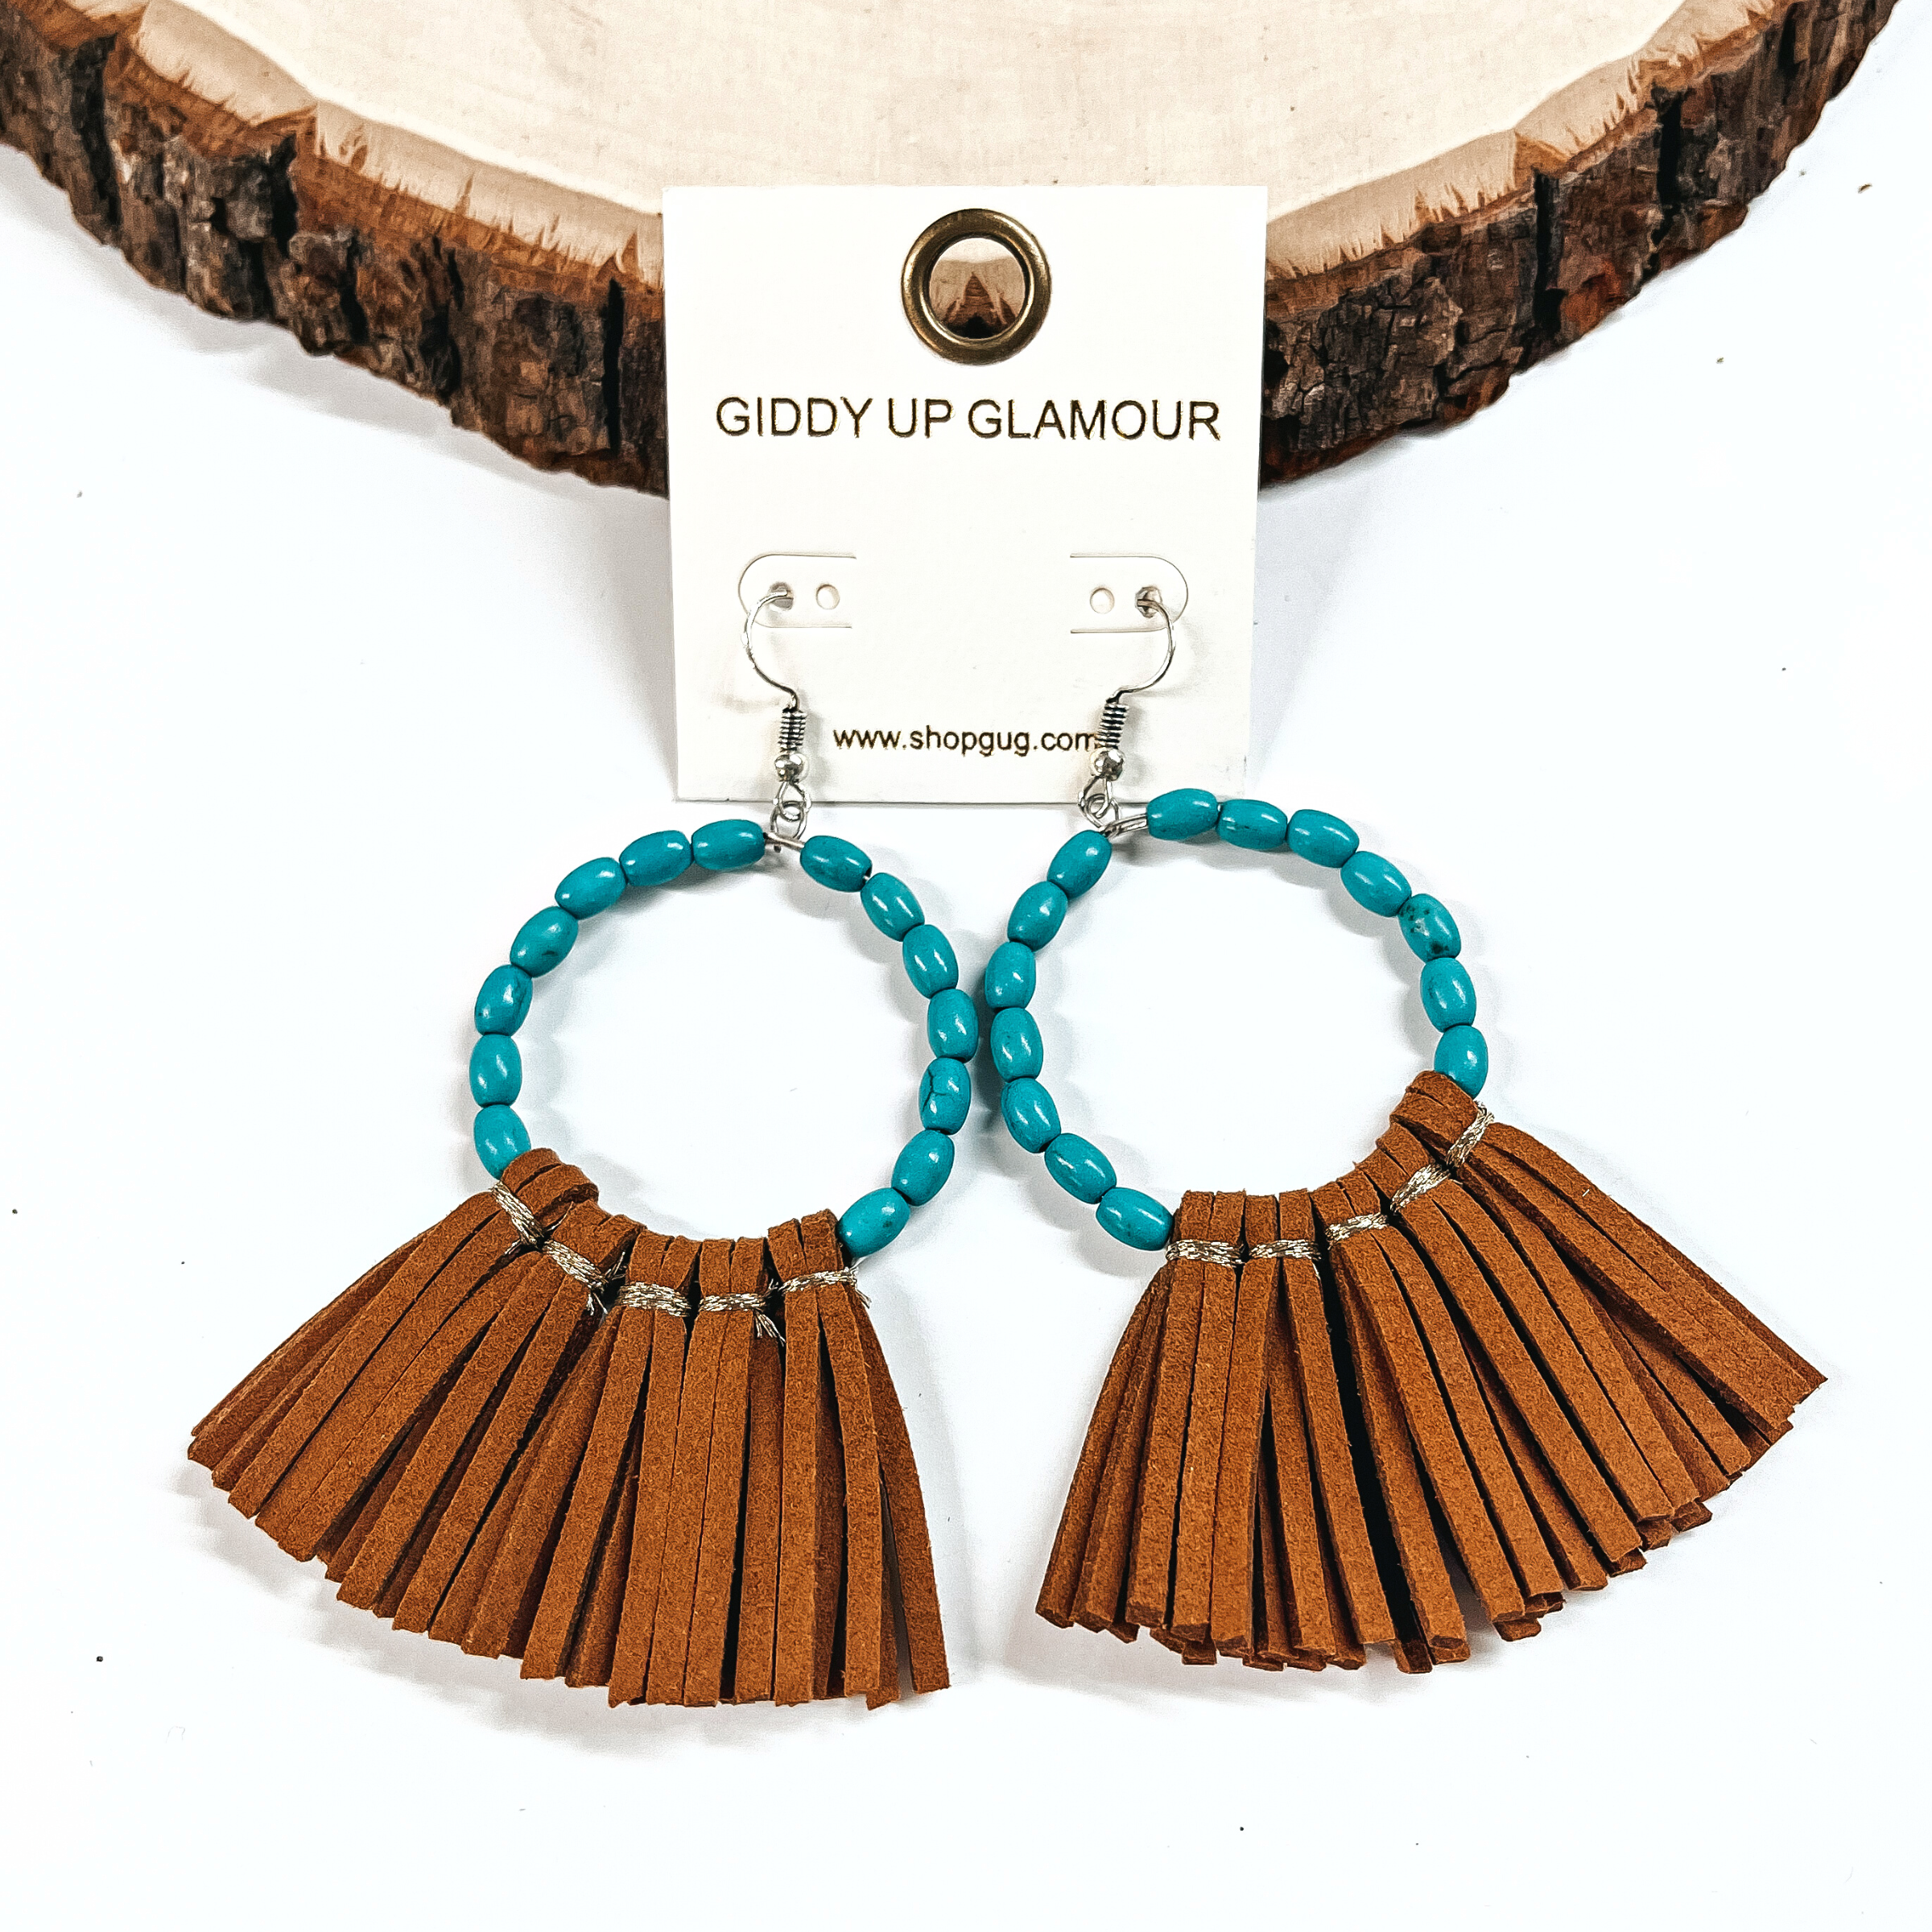 These are oval turquoise beaded hoops with a faux leather tassel fringe  in brown. These earrings are placed on an ivory Giddy Up Glamour  earring card. These earrings are taken leaning up against a  slab of wood and on a white background.